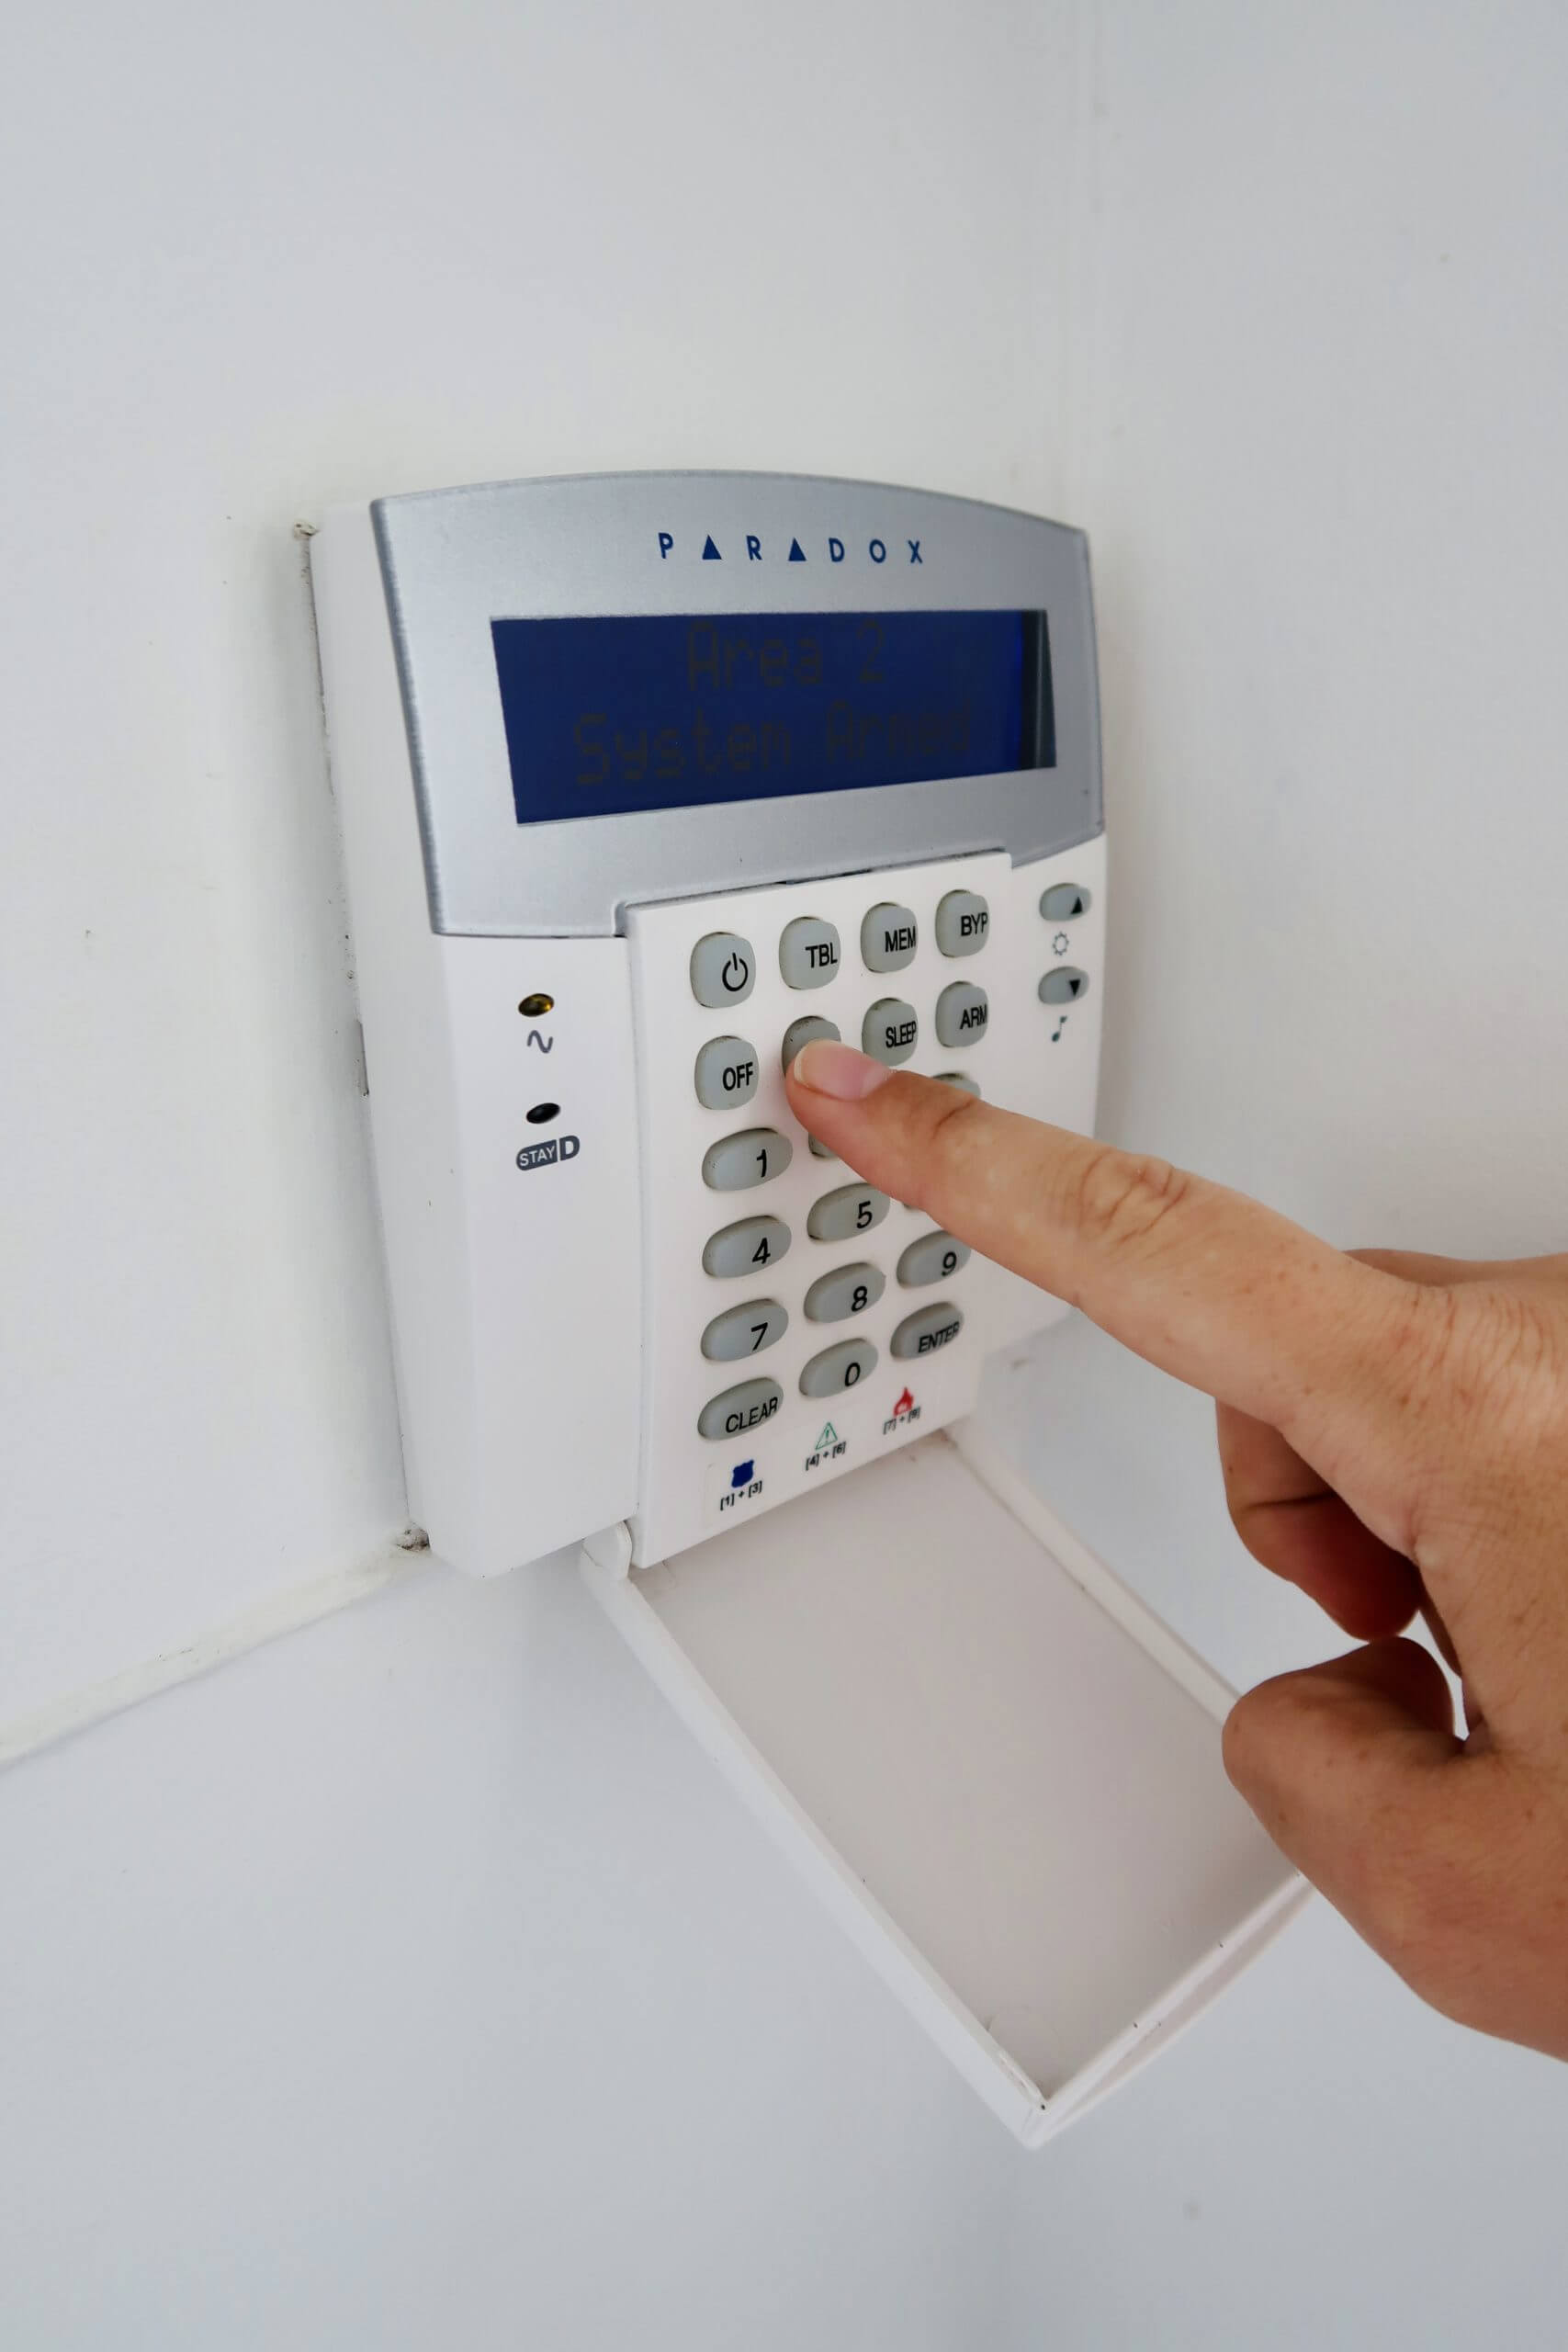 Alarm system keypad with hand pushing button